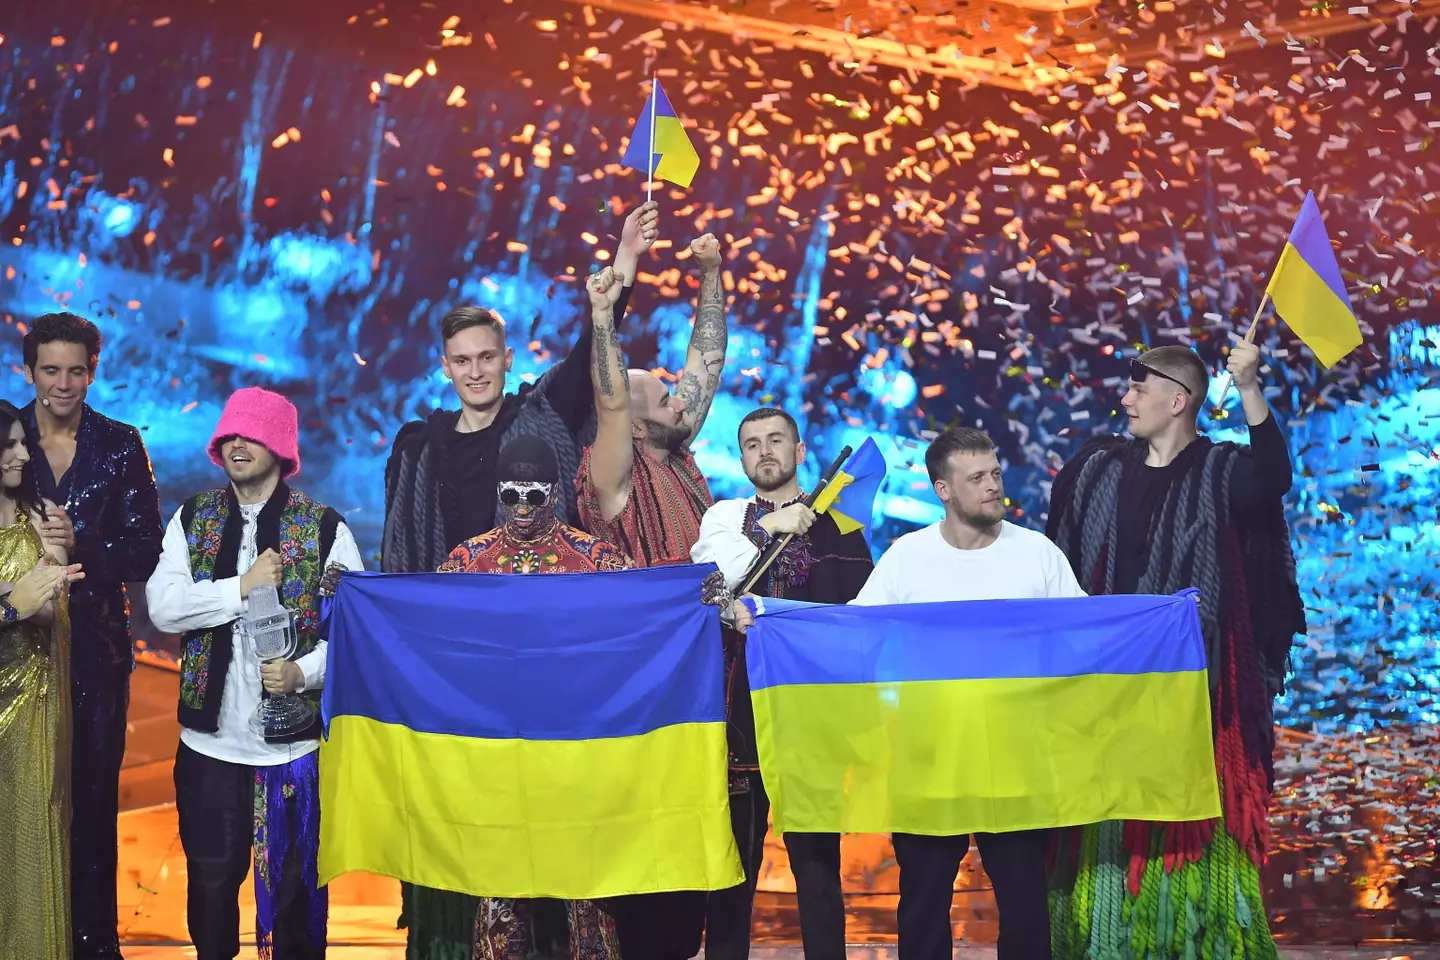 Kalush Orchestra took home the crown for Ukraine at the Eurovision song contest.